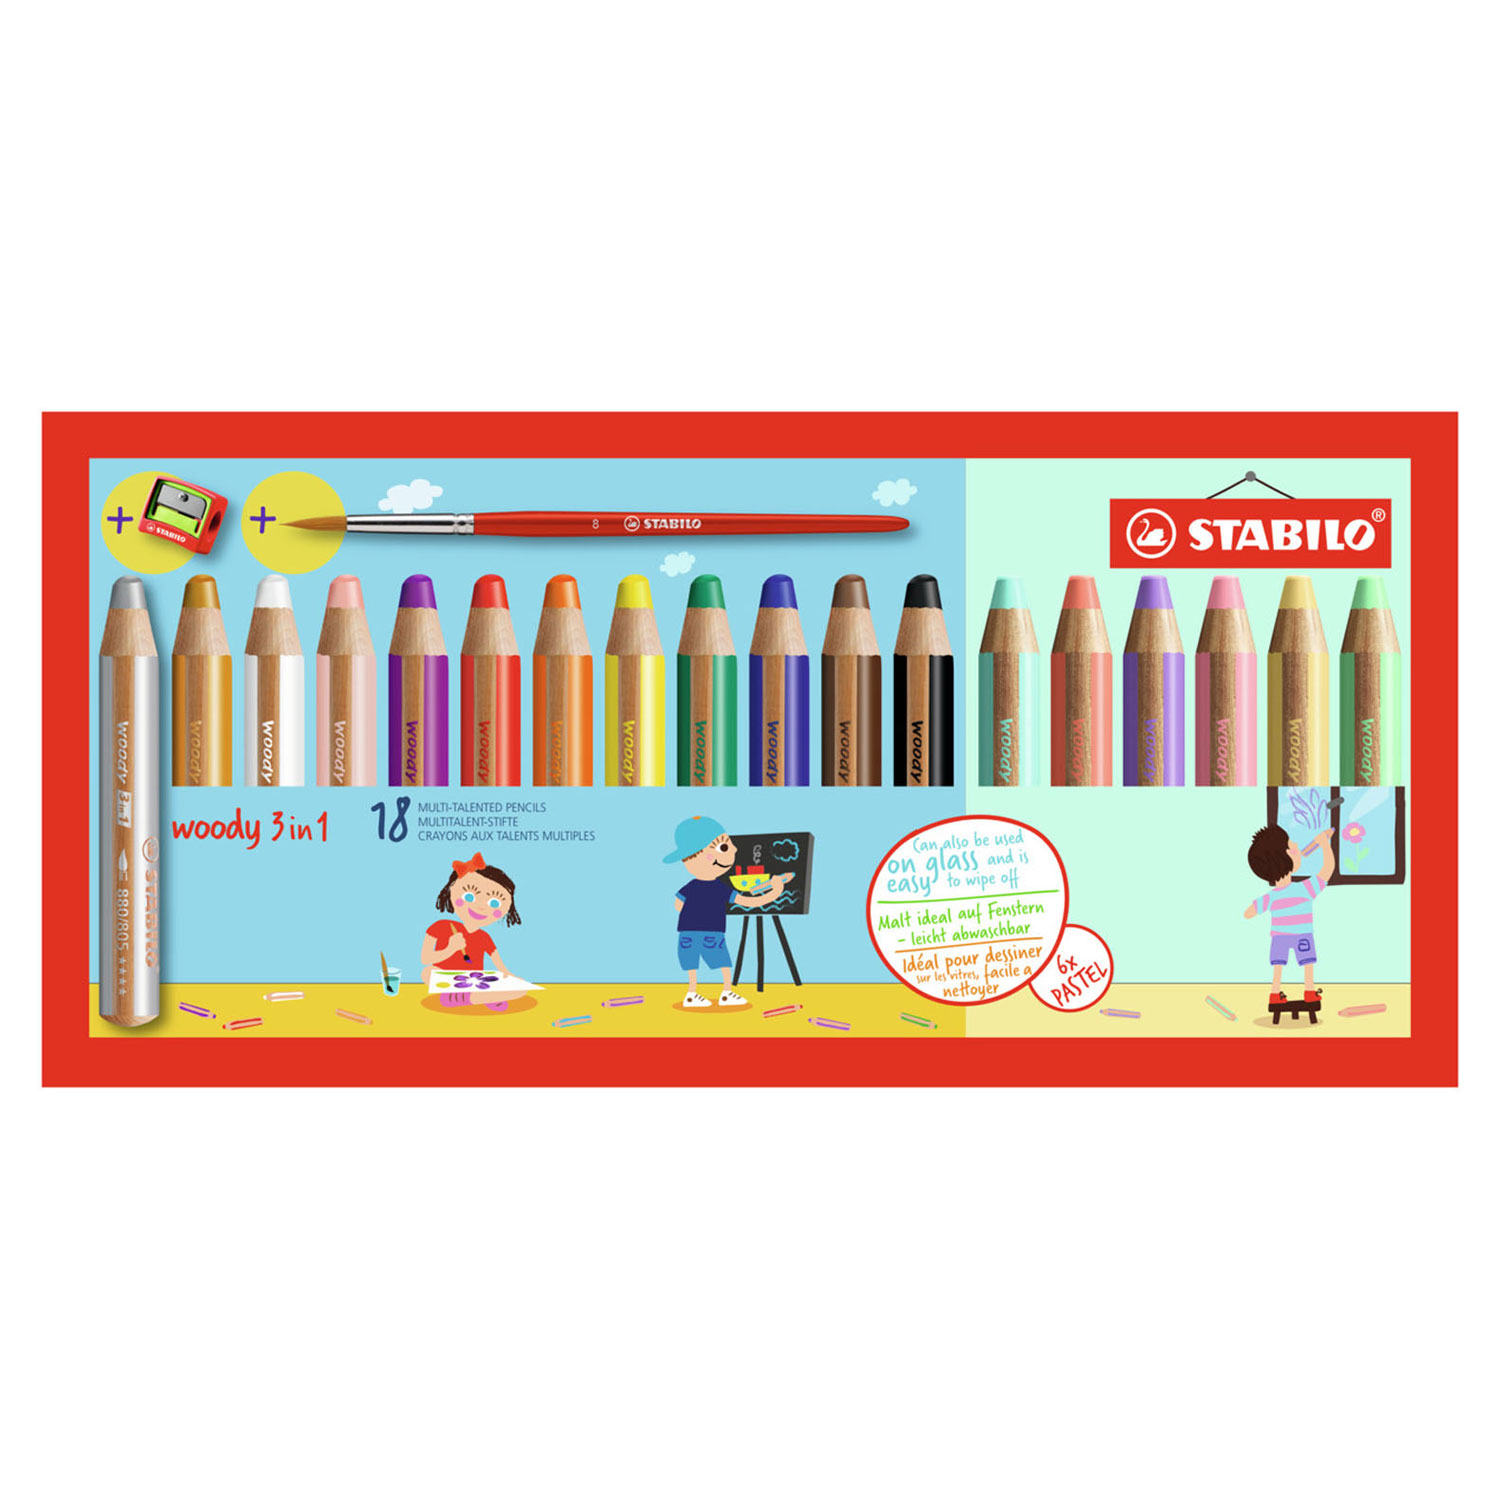 Colorful Pencil, Watercolor, Wax Crayon reSTABILO Woody 3 in 1 h18er Pack  with Sharpener and Brush, with 18 Different Colors - AliExpress